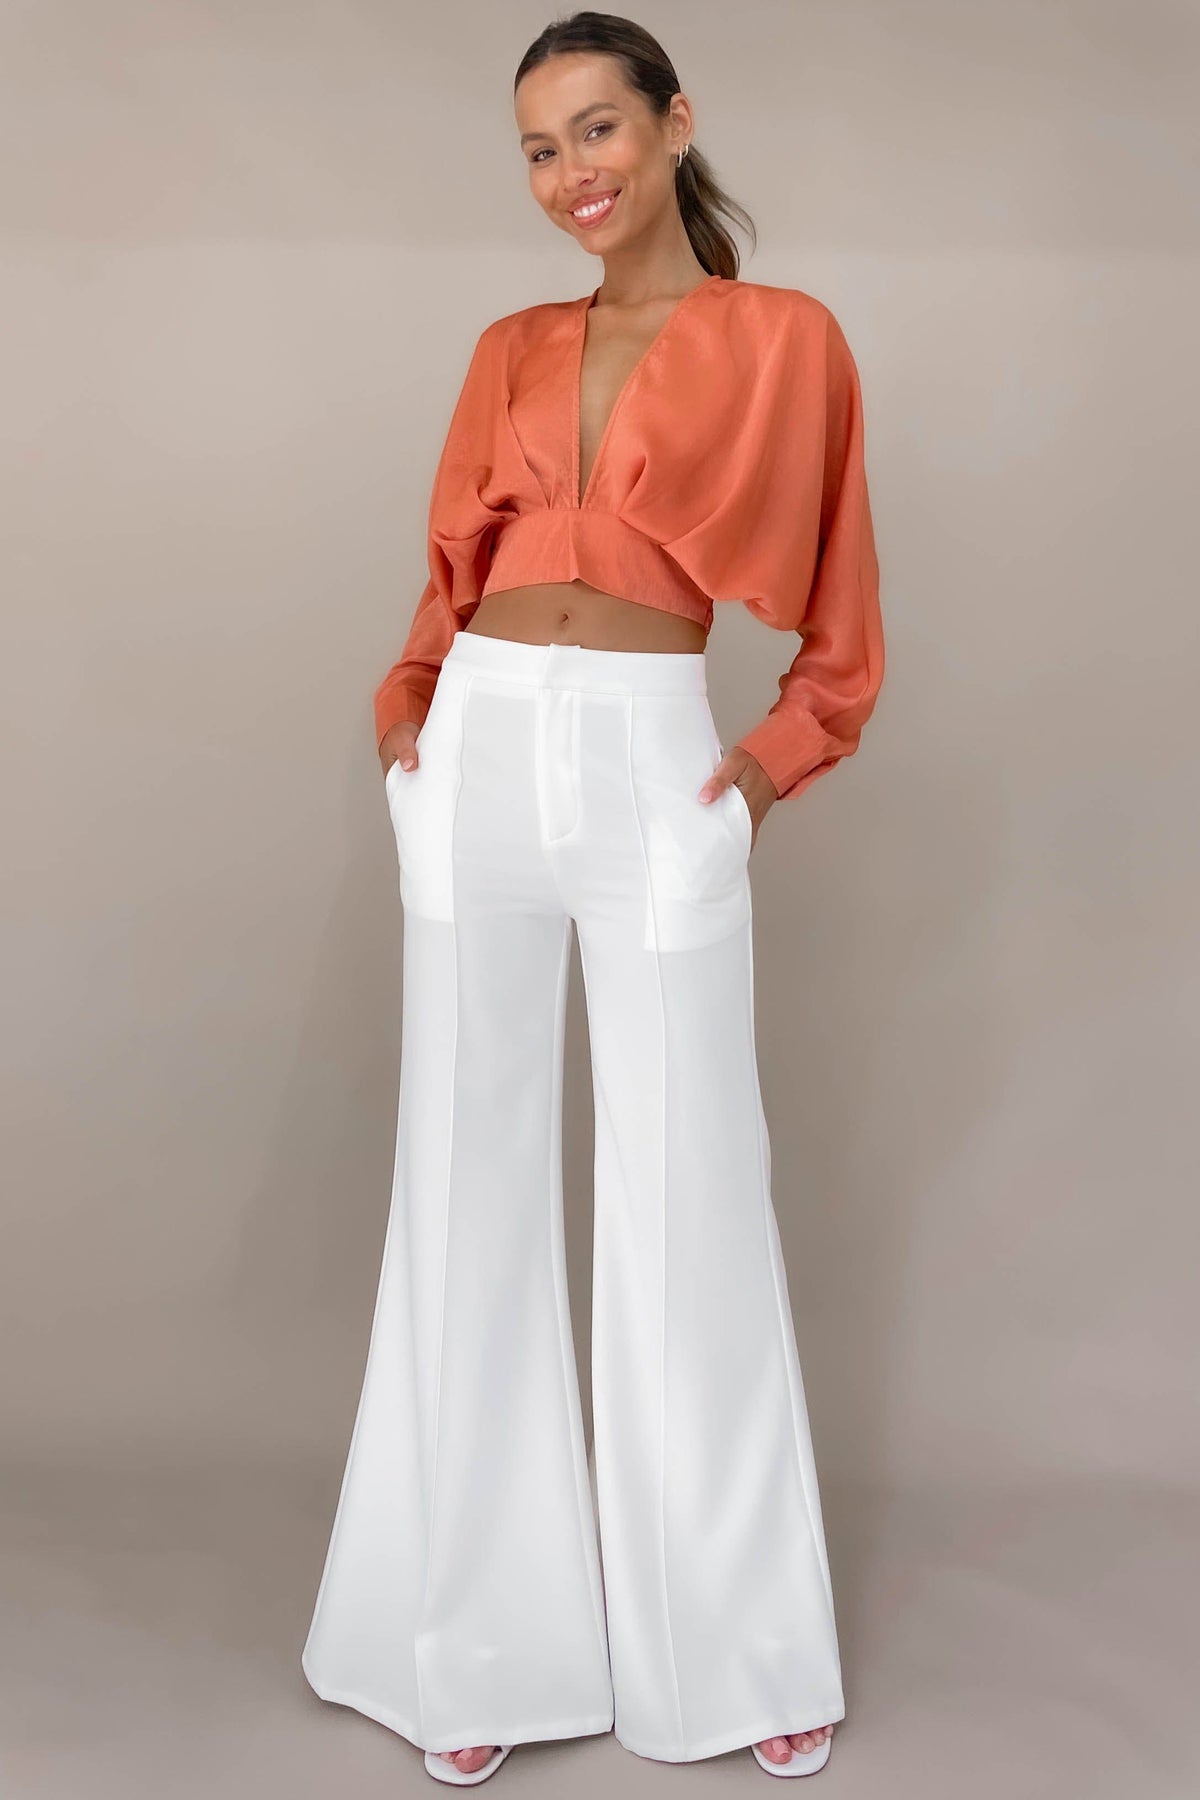 Blare Pants, BOTTOMS, HIGH WAISTED PANTS, NEW ARRIVALS, PANTS, POLYESTER, WHITE, WIDE LEG, , -MISHKAH